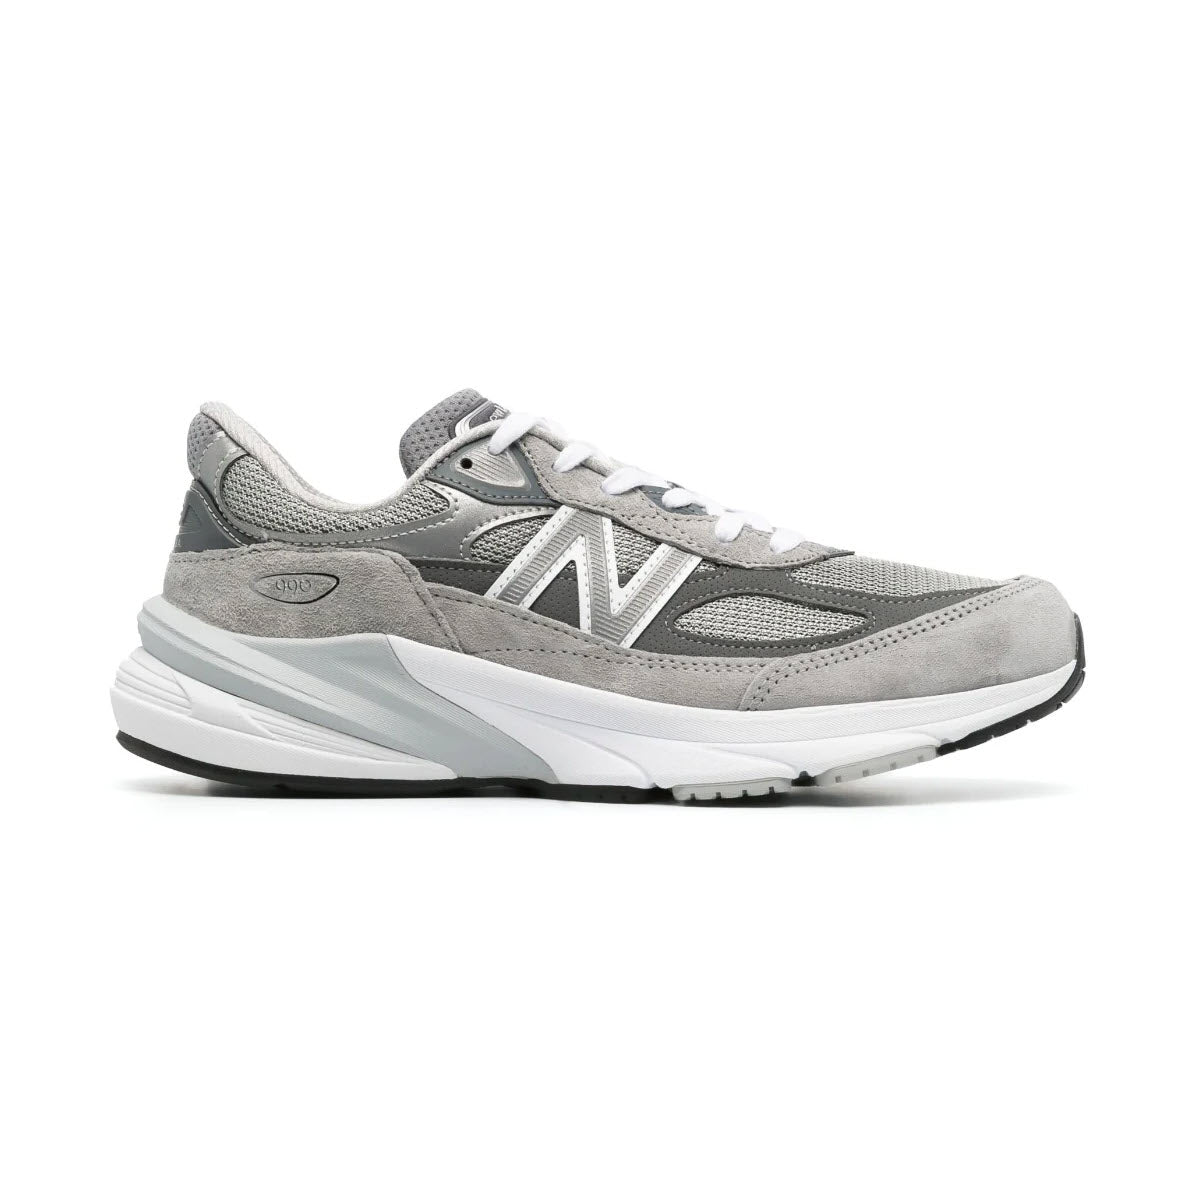 A New Balance NEW BALANCE 990 V6 running shoe in gray and white, featuring a mesh upper and ENCAP midsole cushioning, displayed against a white background.